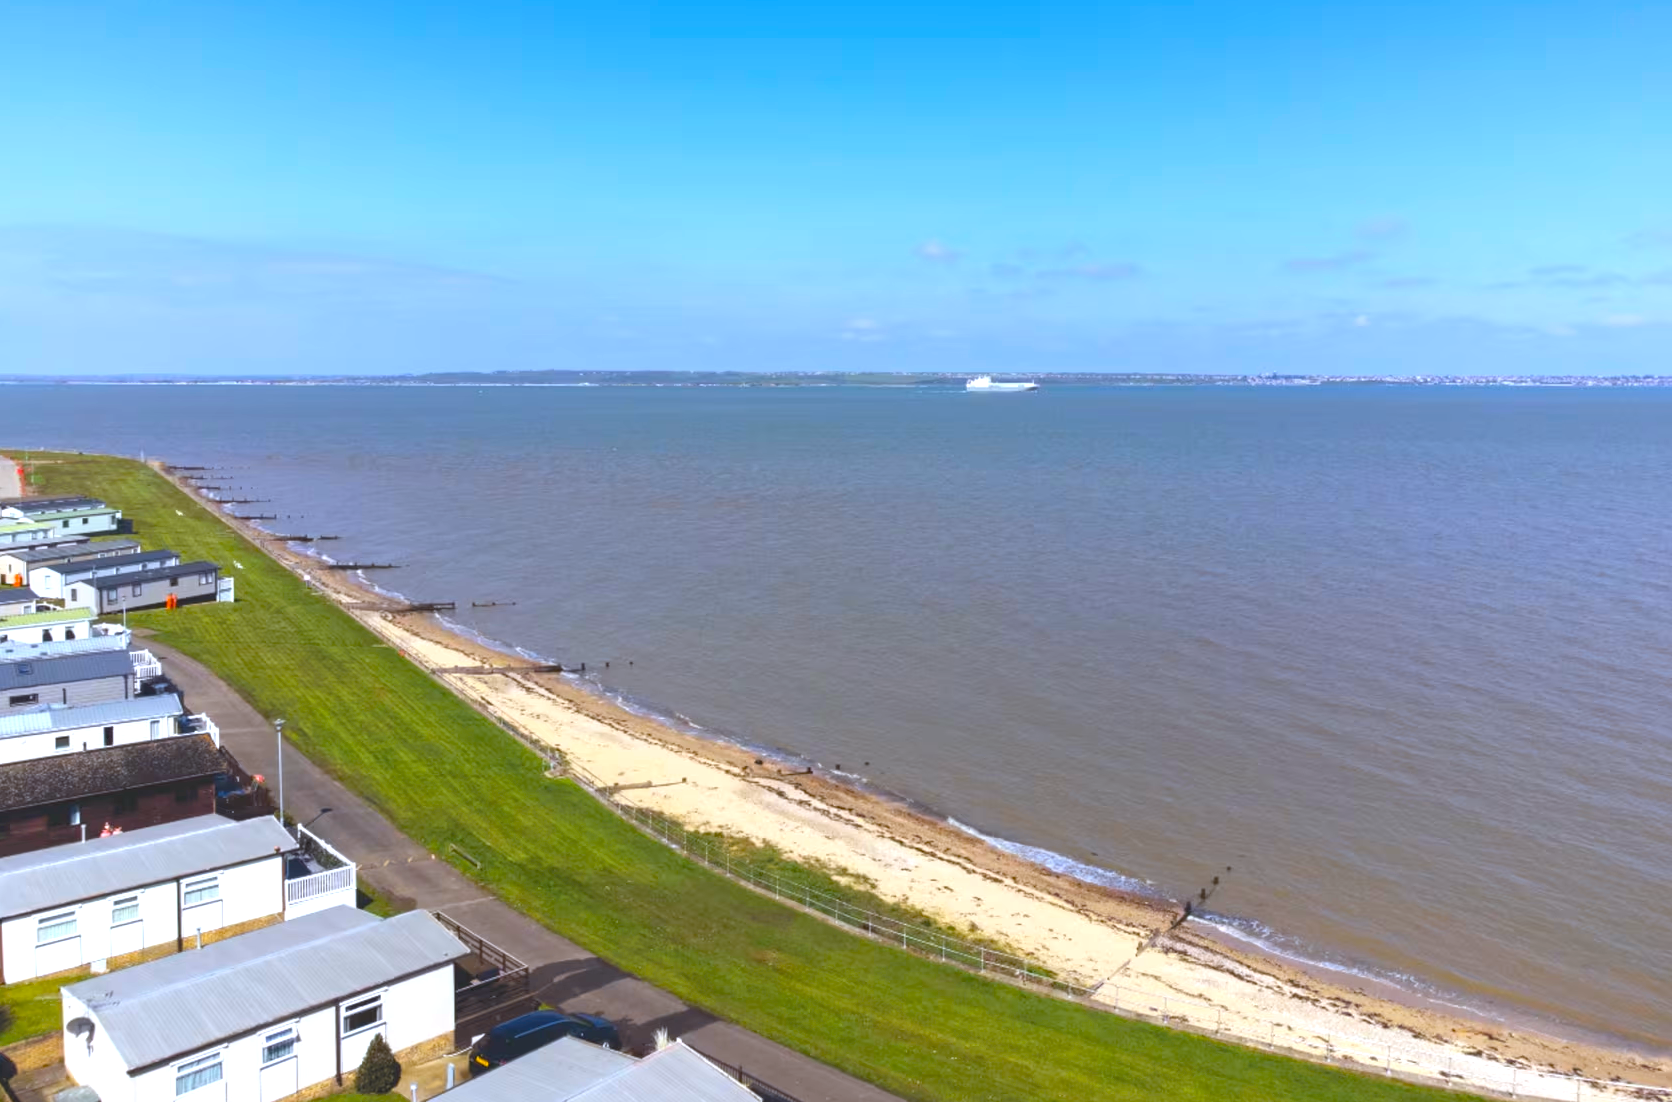 The park offers a prime location with easy access to the coast of the Thames Estuary